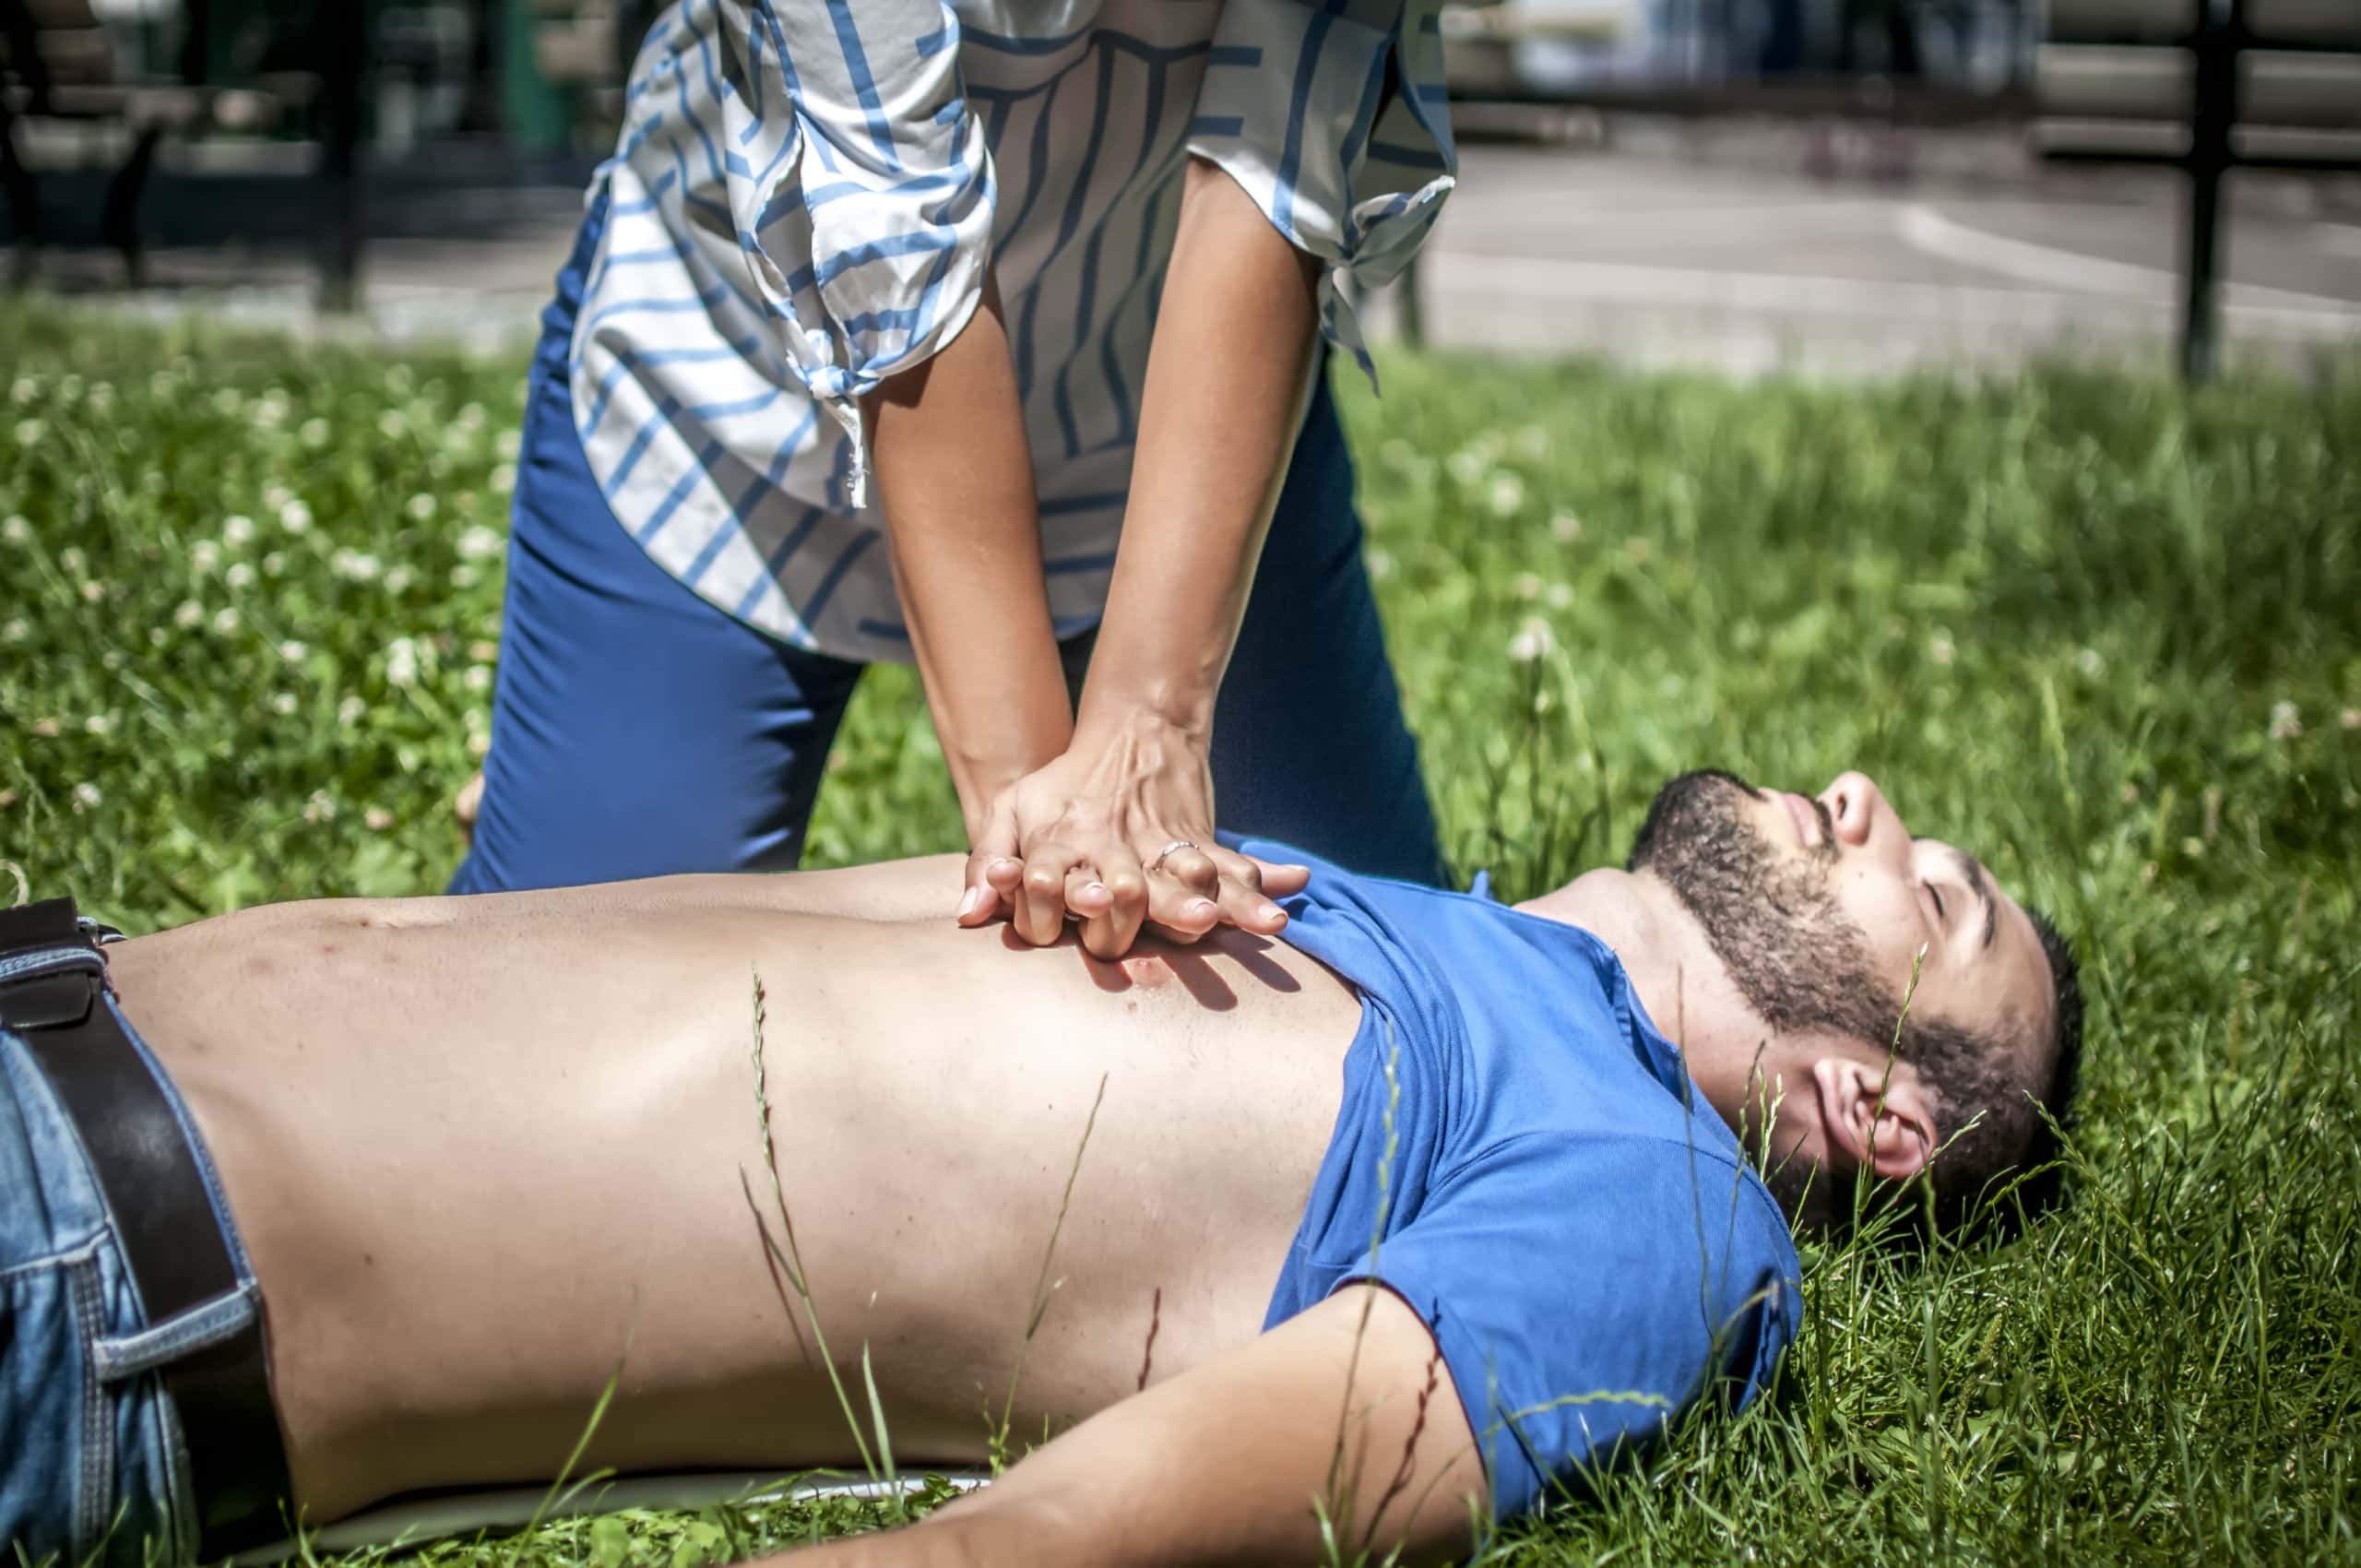 Emergency CPR on a Man who has Heart Attack on the grass